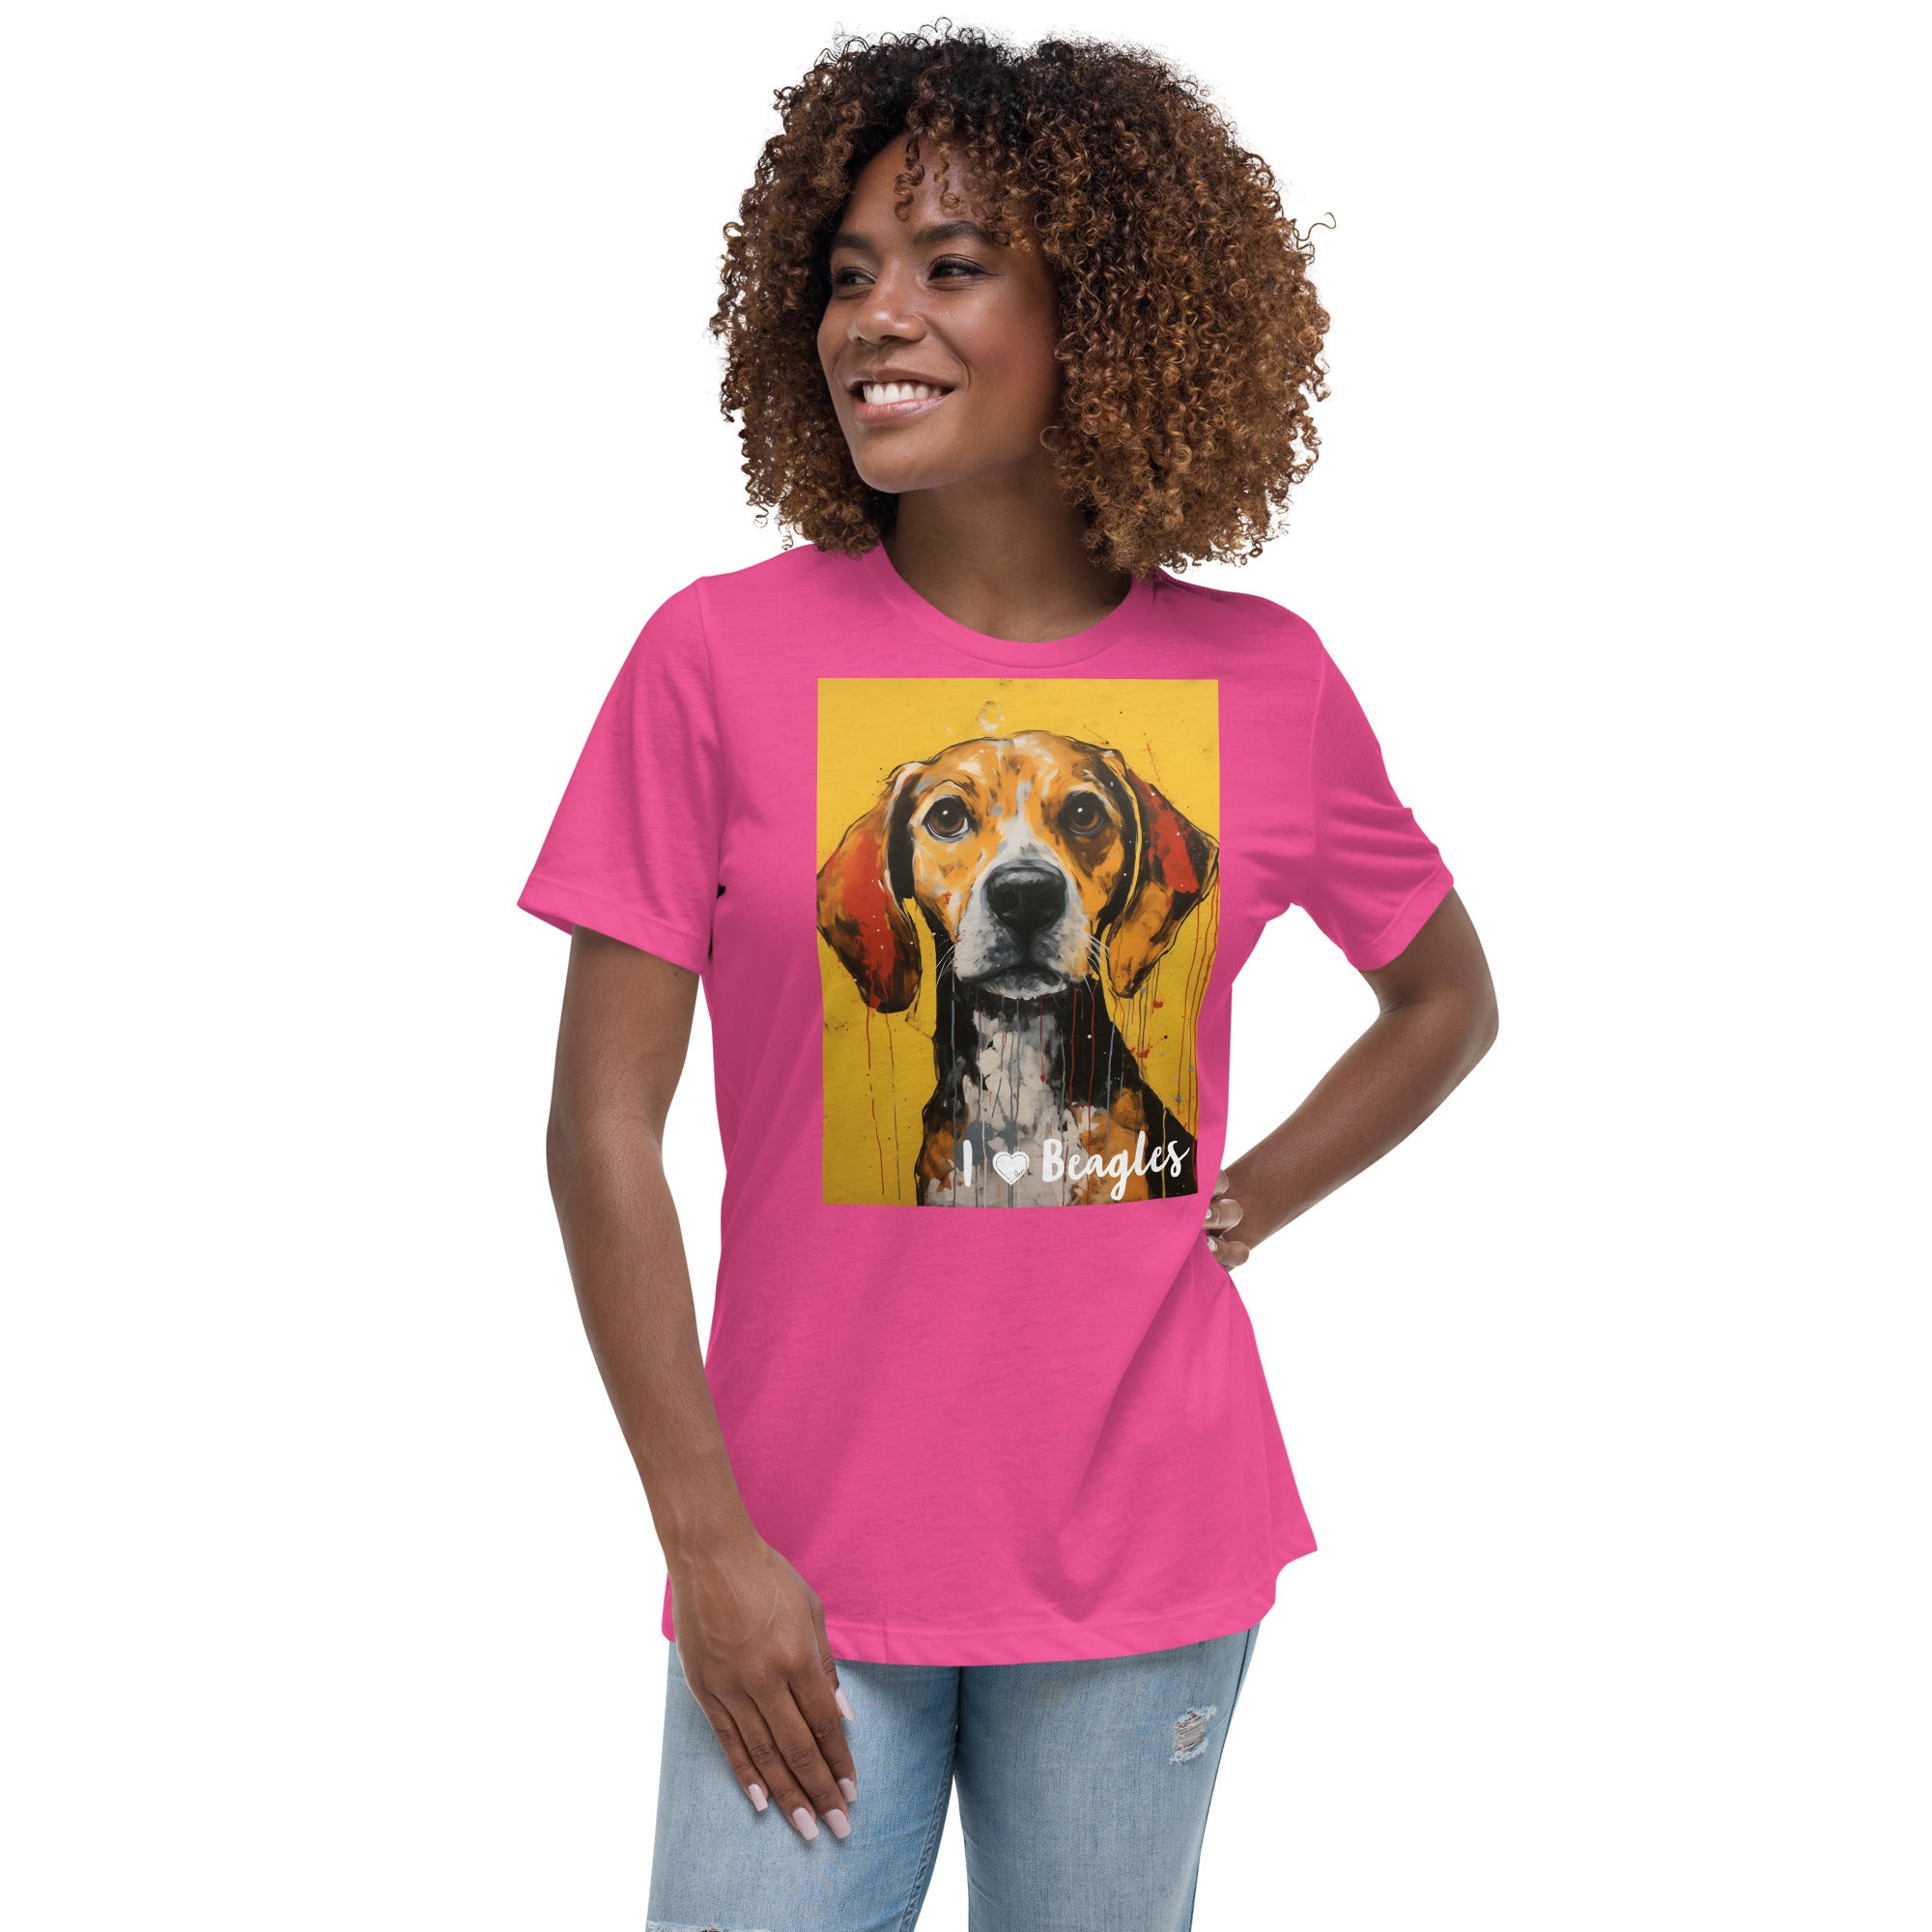 Women's Relaxed T-Shirt - I ❤ Dogs - Beagle